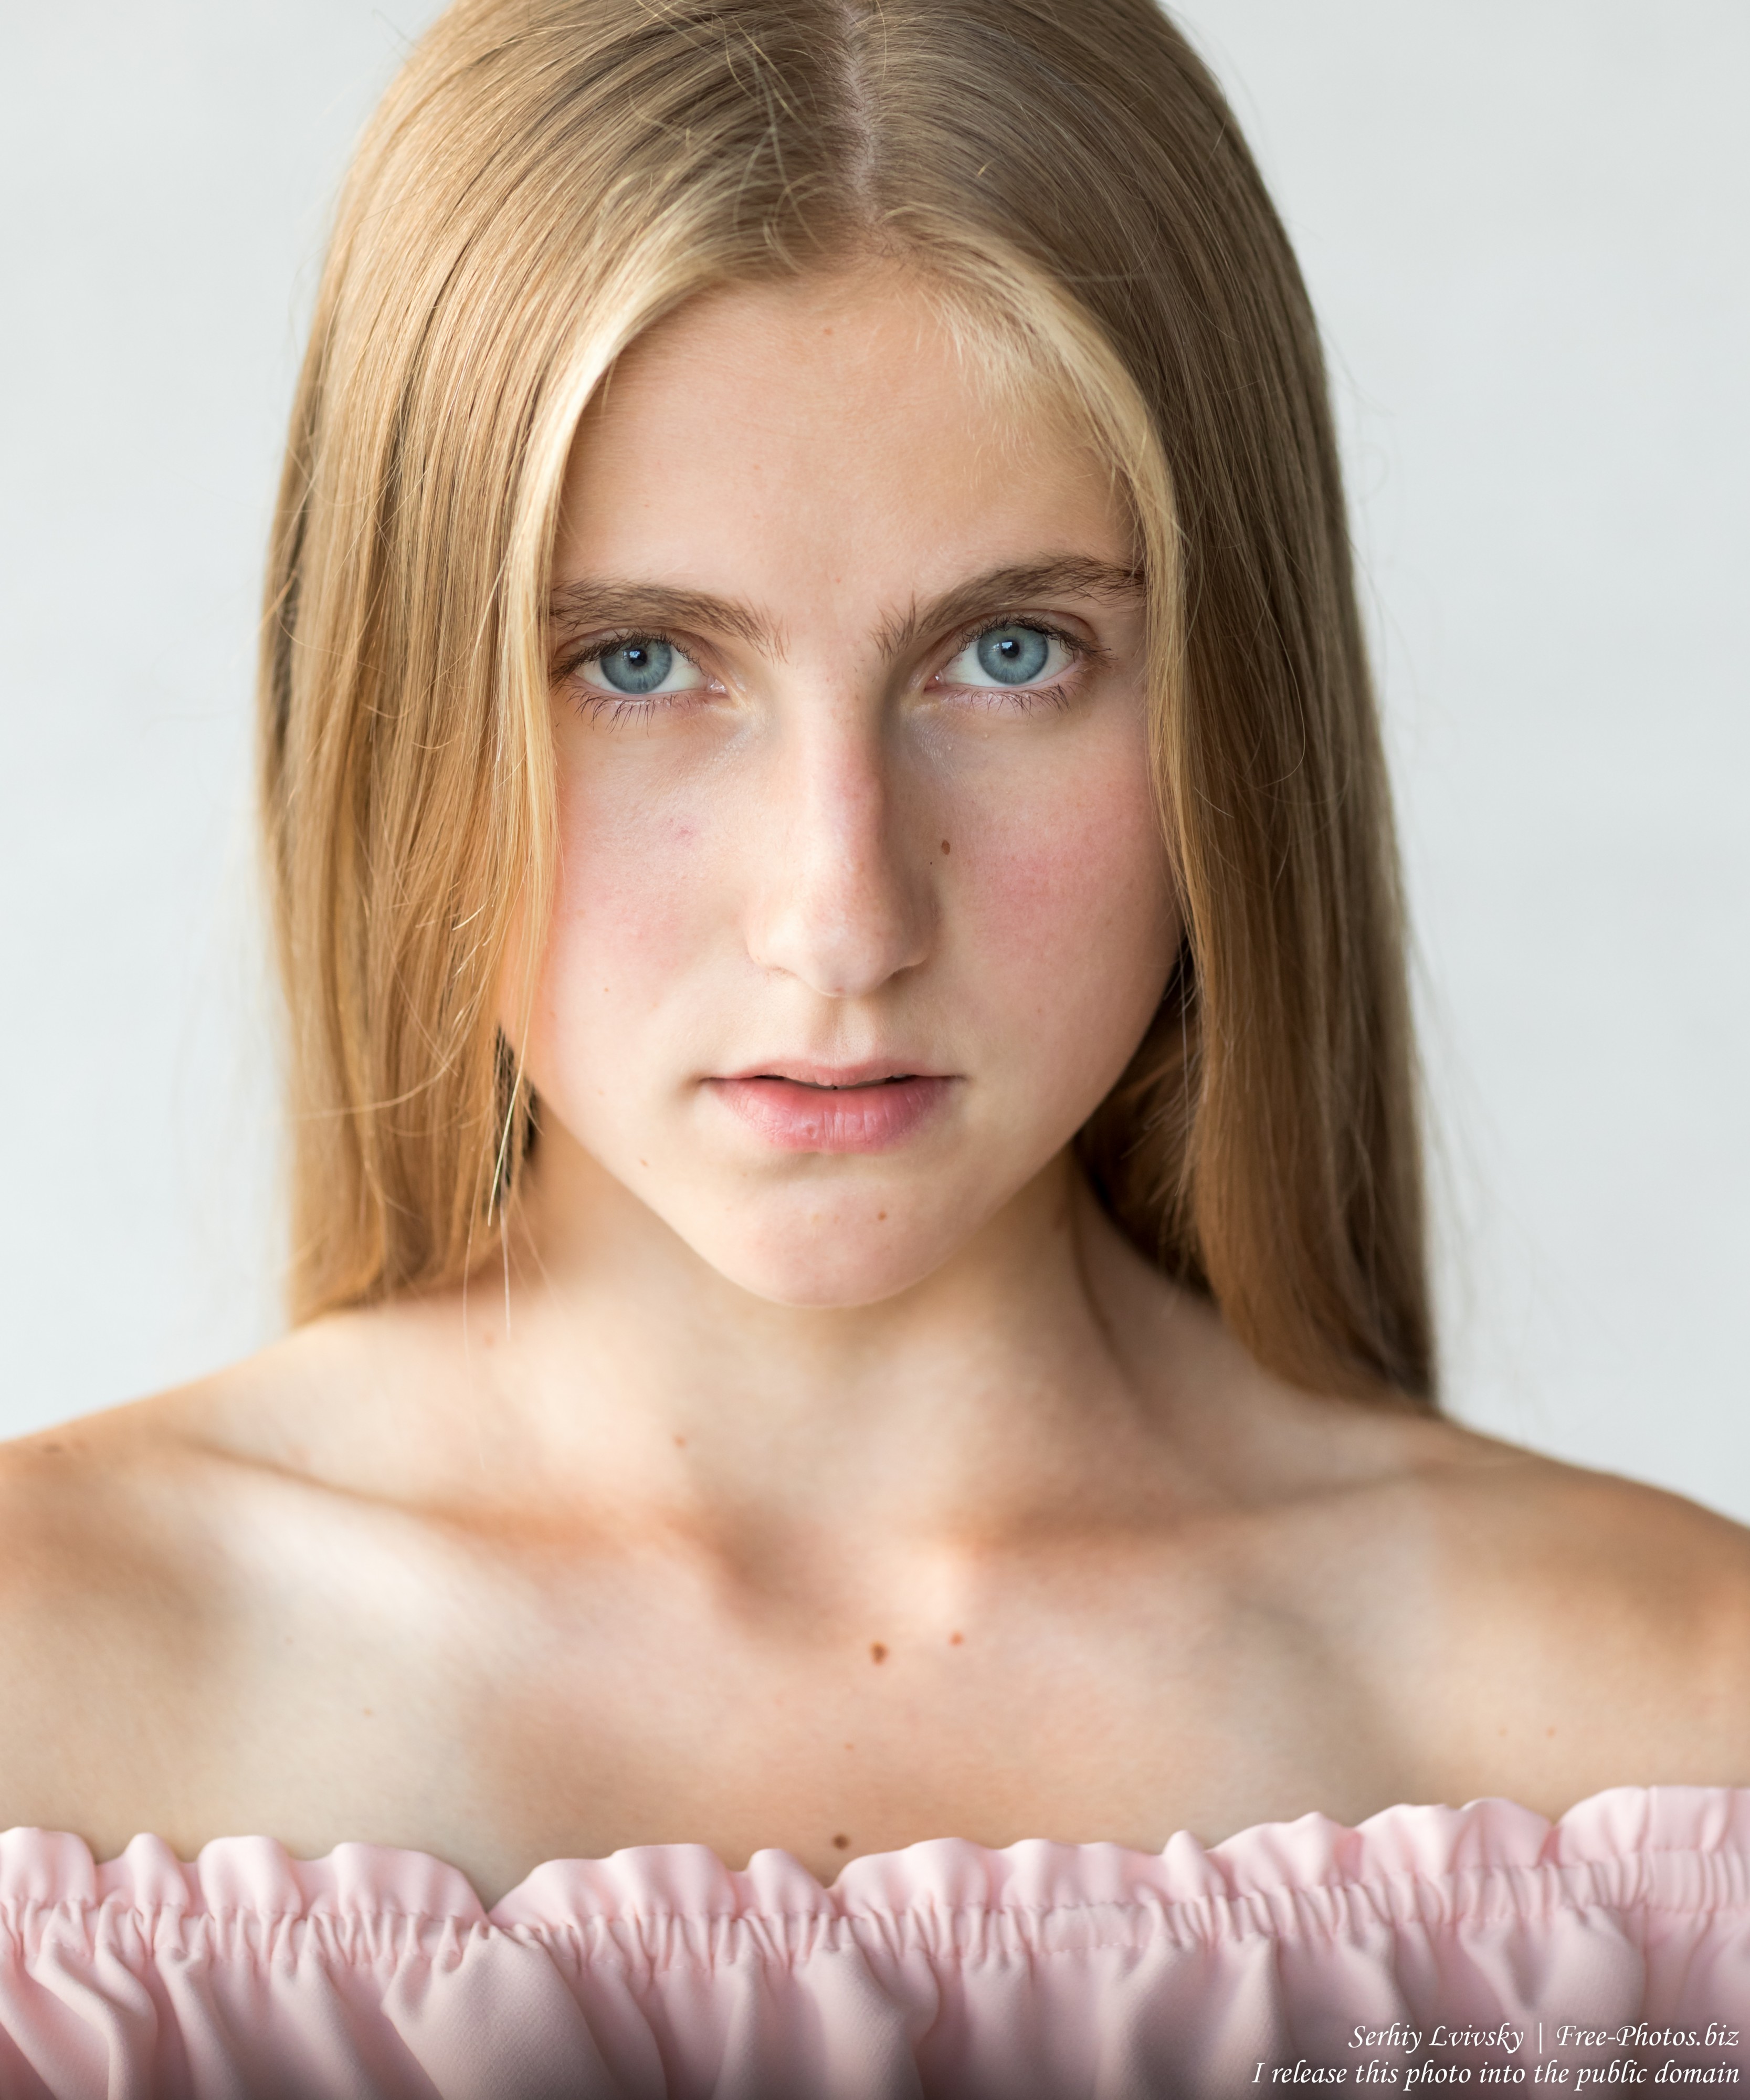 Katia - a 16-year-old natural blonde girl with blue eyes photographed in June 2019 by Serhiy Lvivsky, picture 5